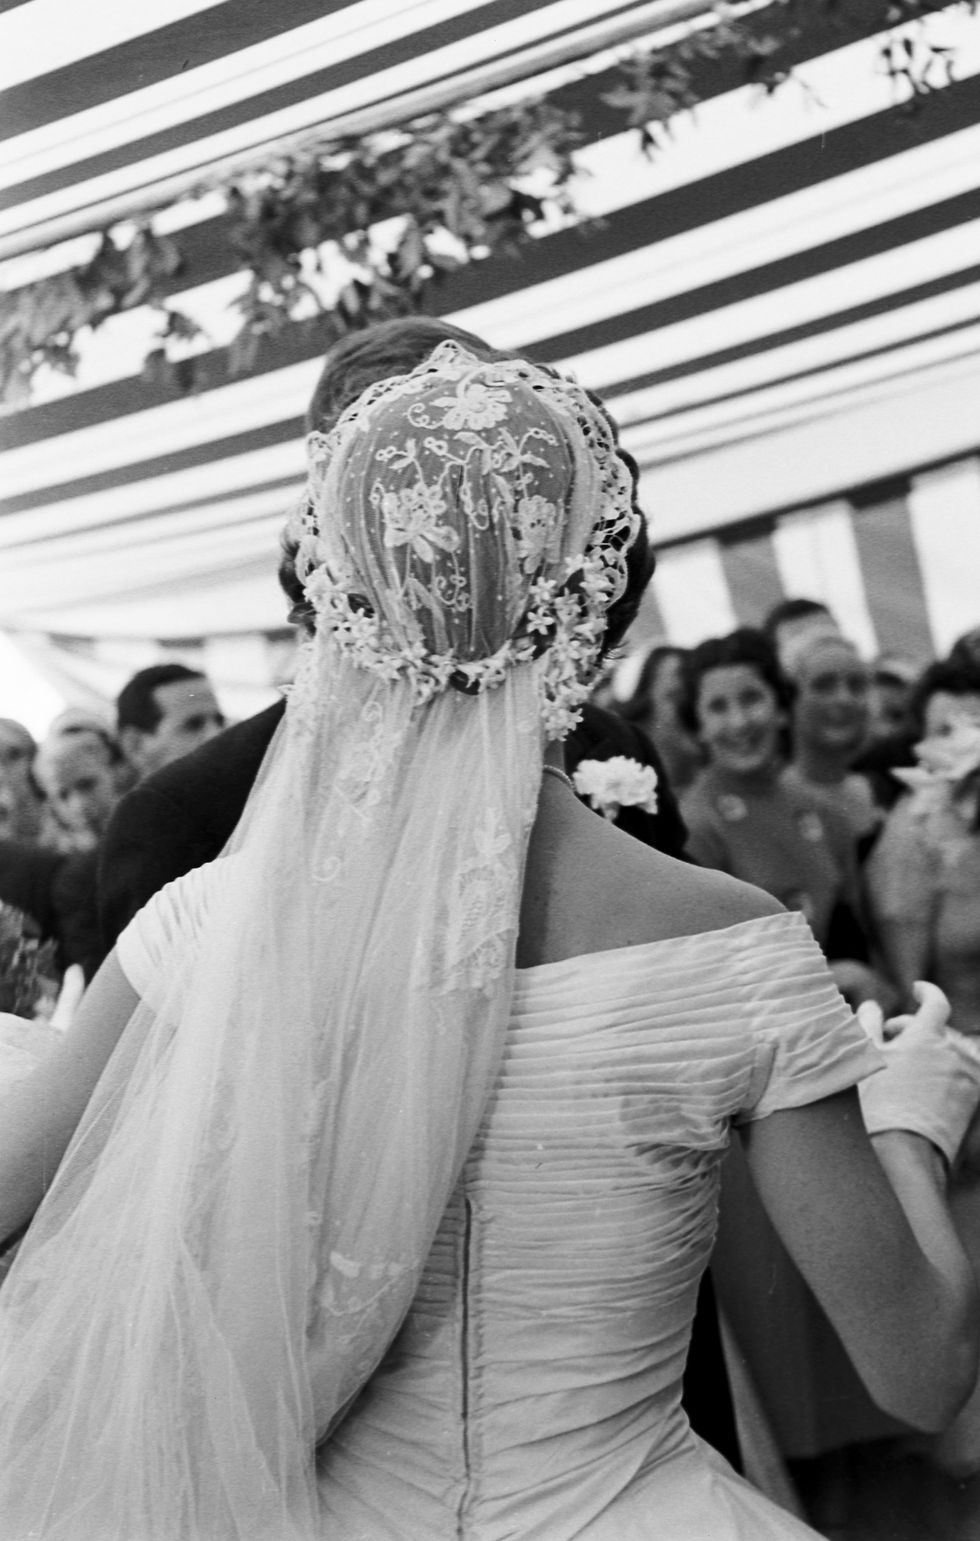 view from behind of jacqueline kennedy 1929   1994 in a battenburg wedding dress as she dances with her husband, future us president john f kennedy 1917   1963 at their wedding reception, newport, rhode island, september 12, 1953 photo by lisa larsenthe life picture collection via getty images